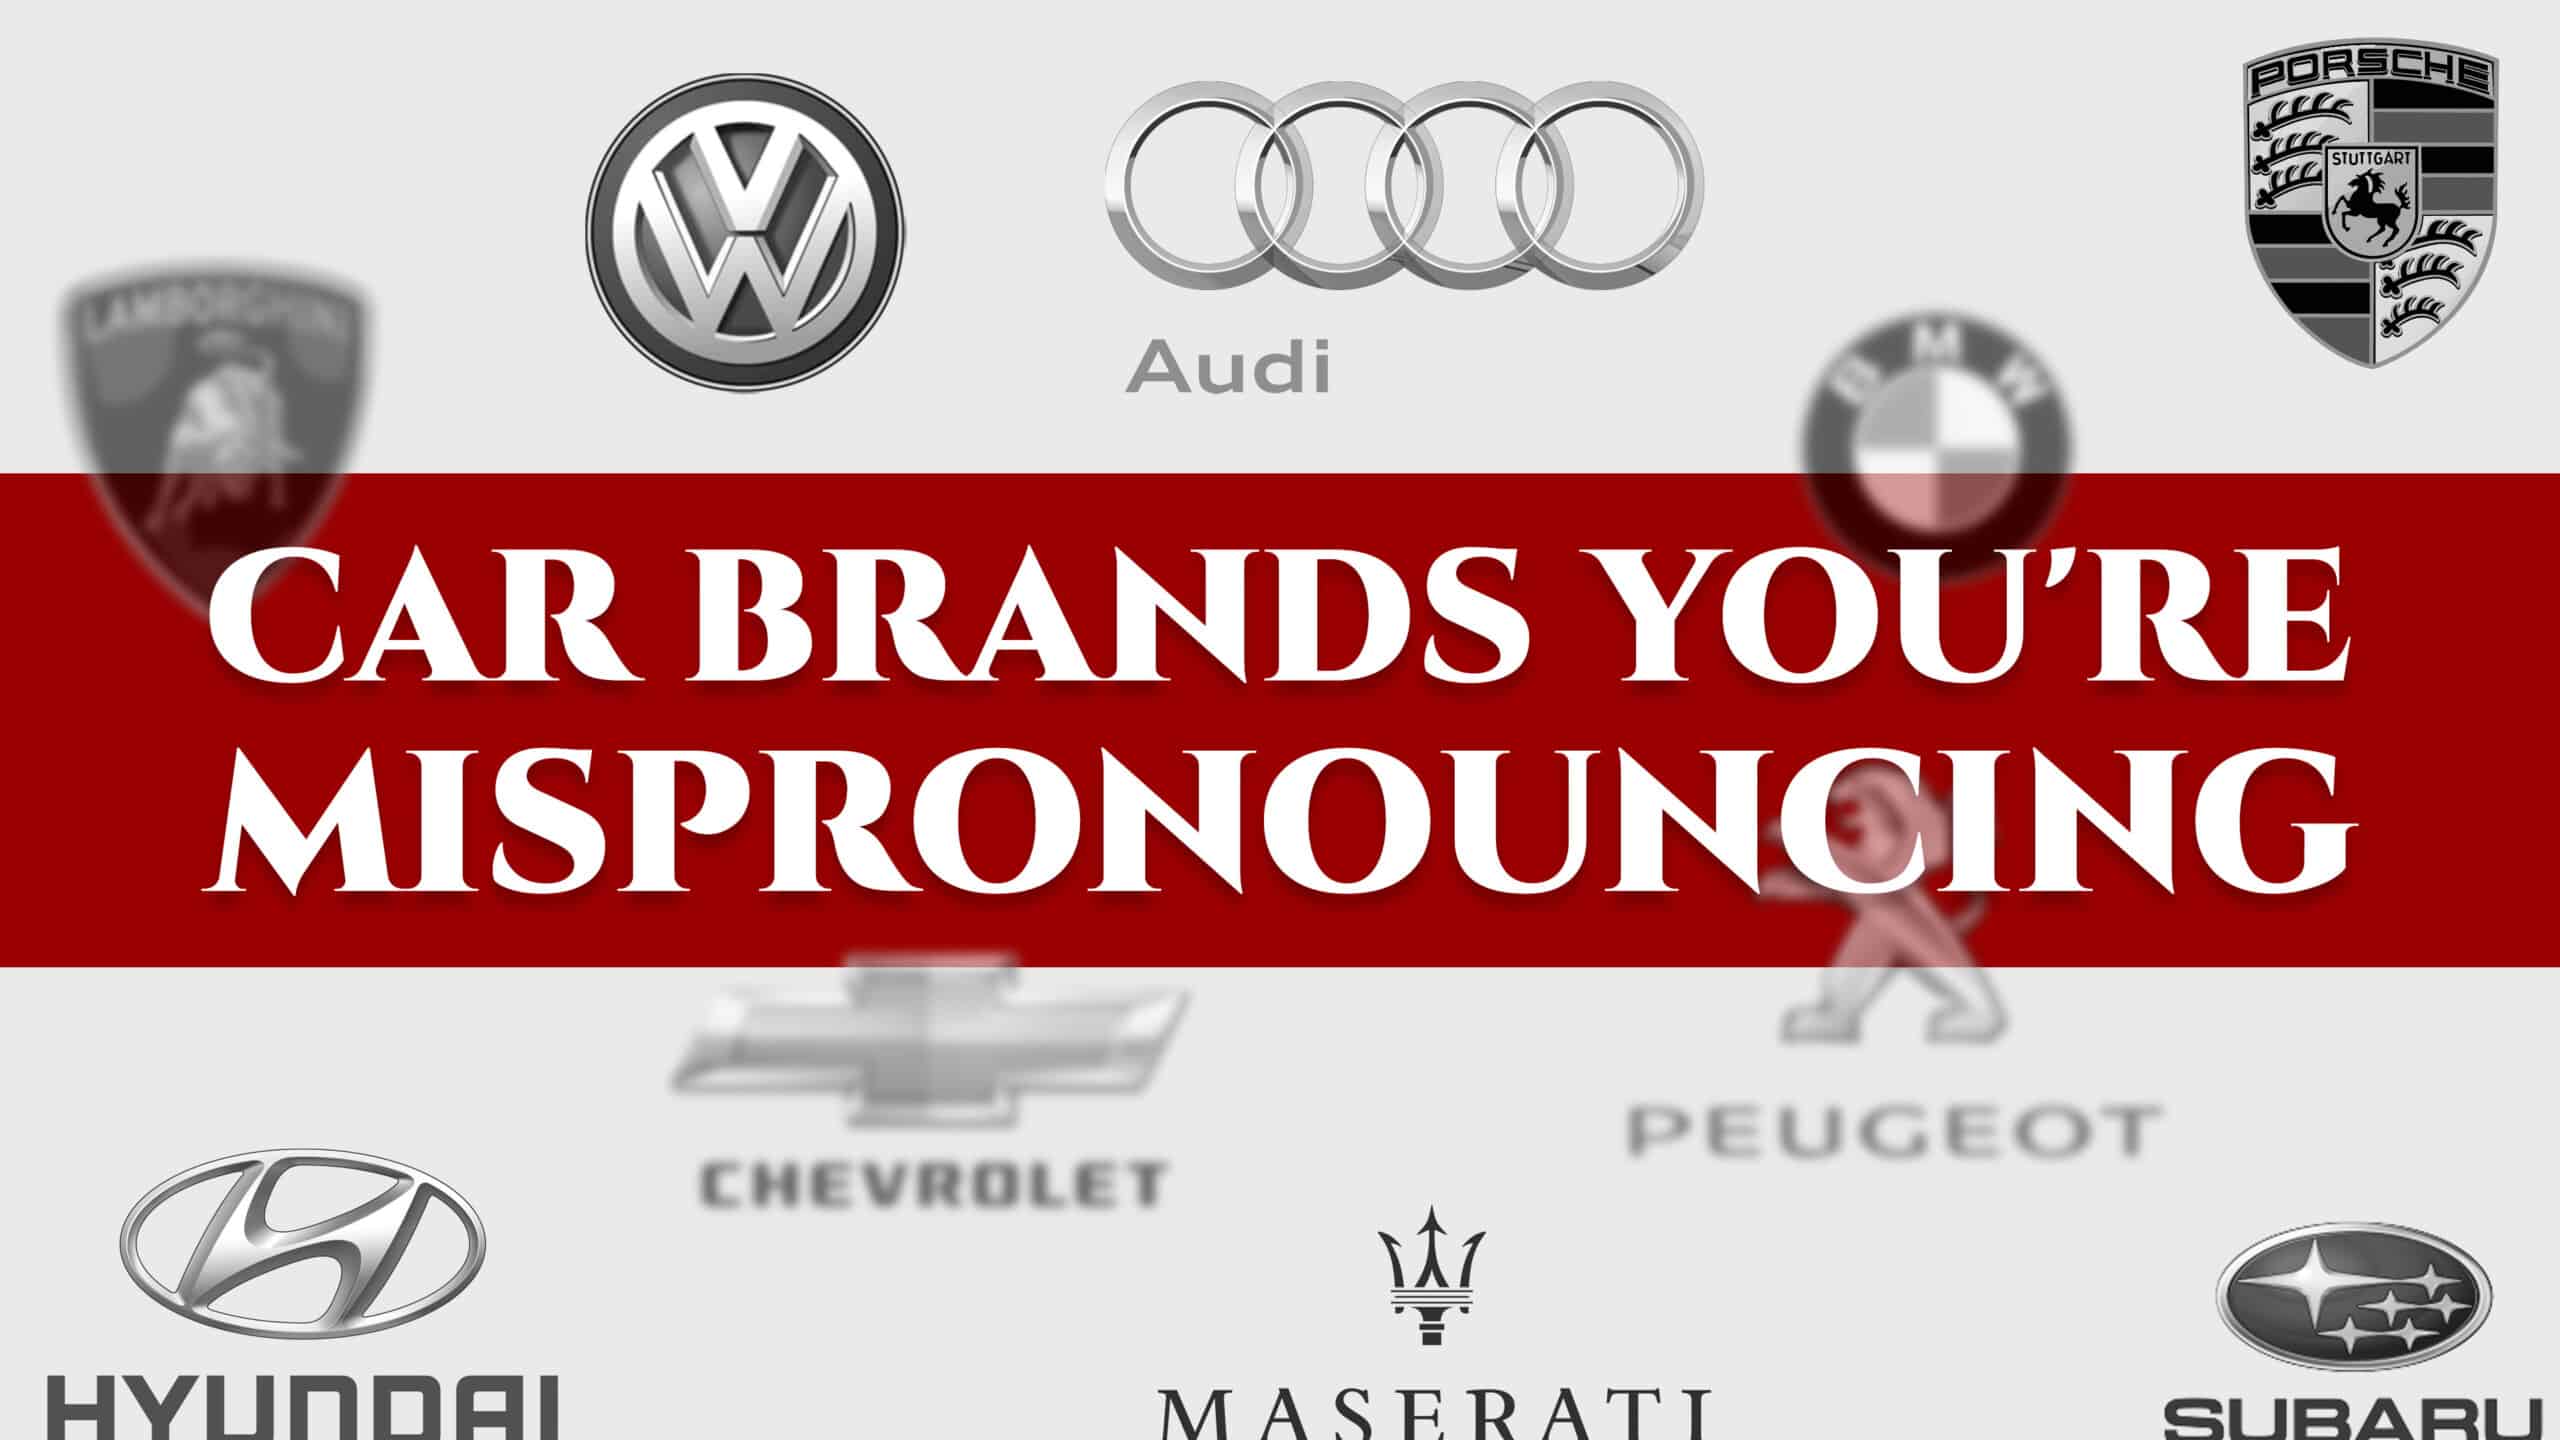 How to pronounce brand names in English